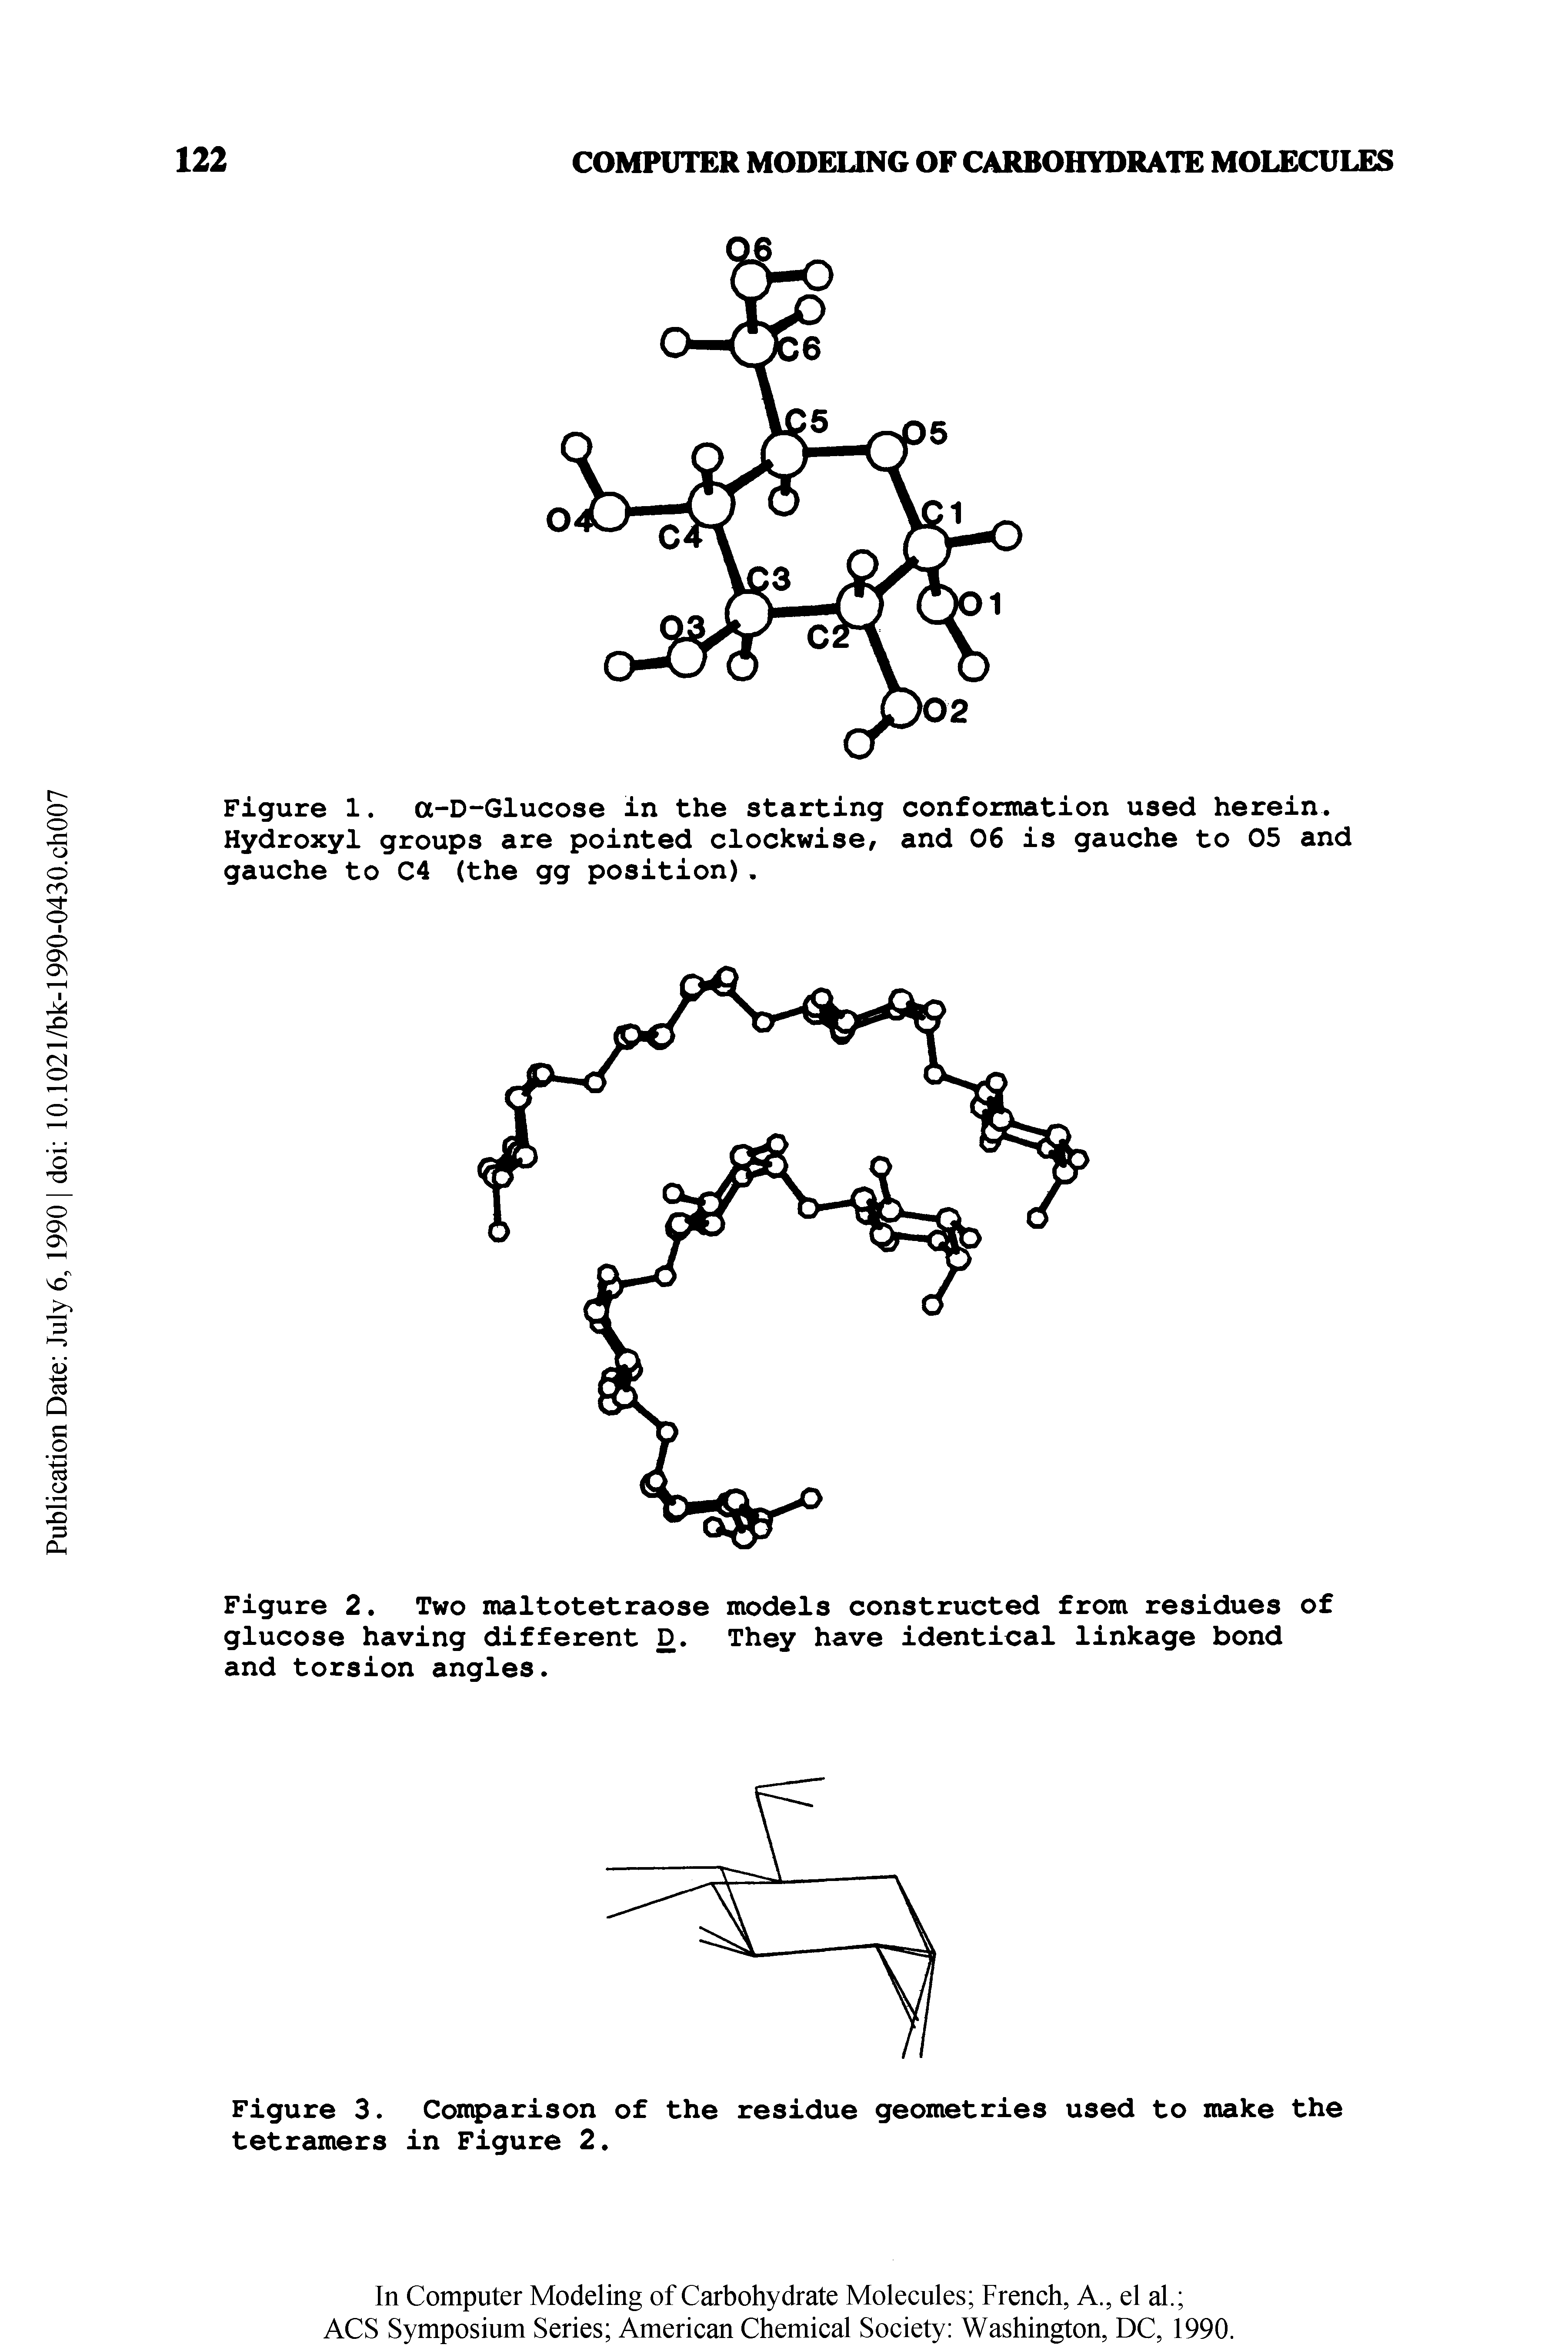 Figure 2. Two maltotetraose models constructed from residues of glucose having different D. They have identical linkage bond and torsion angles.